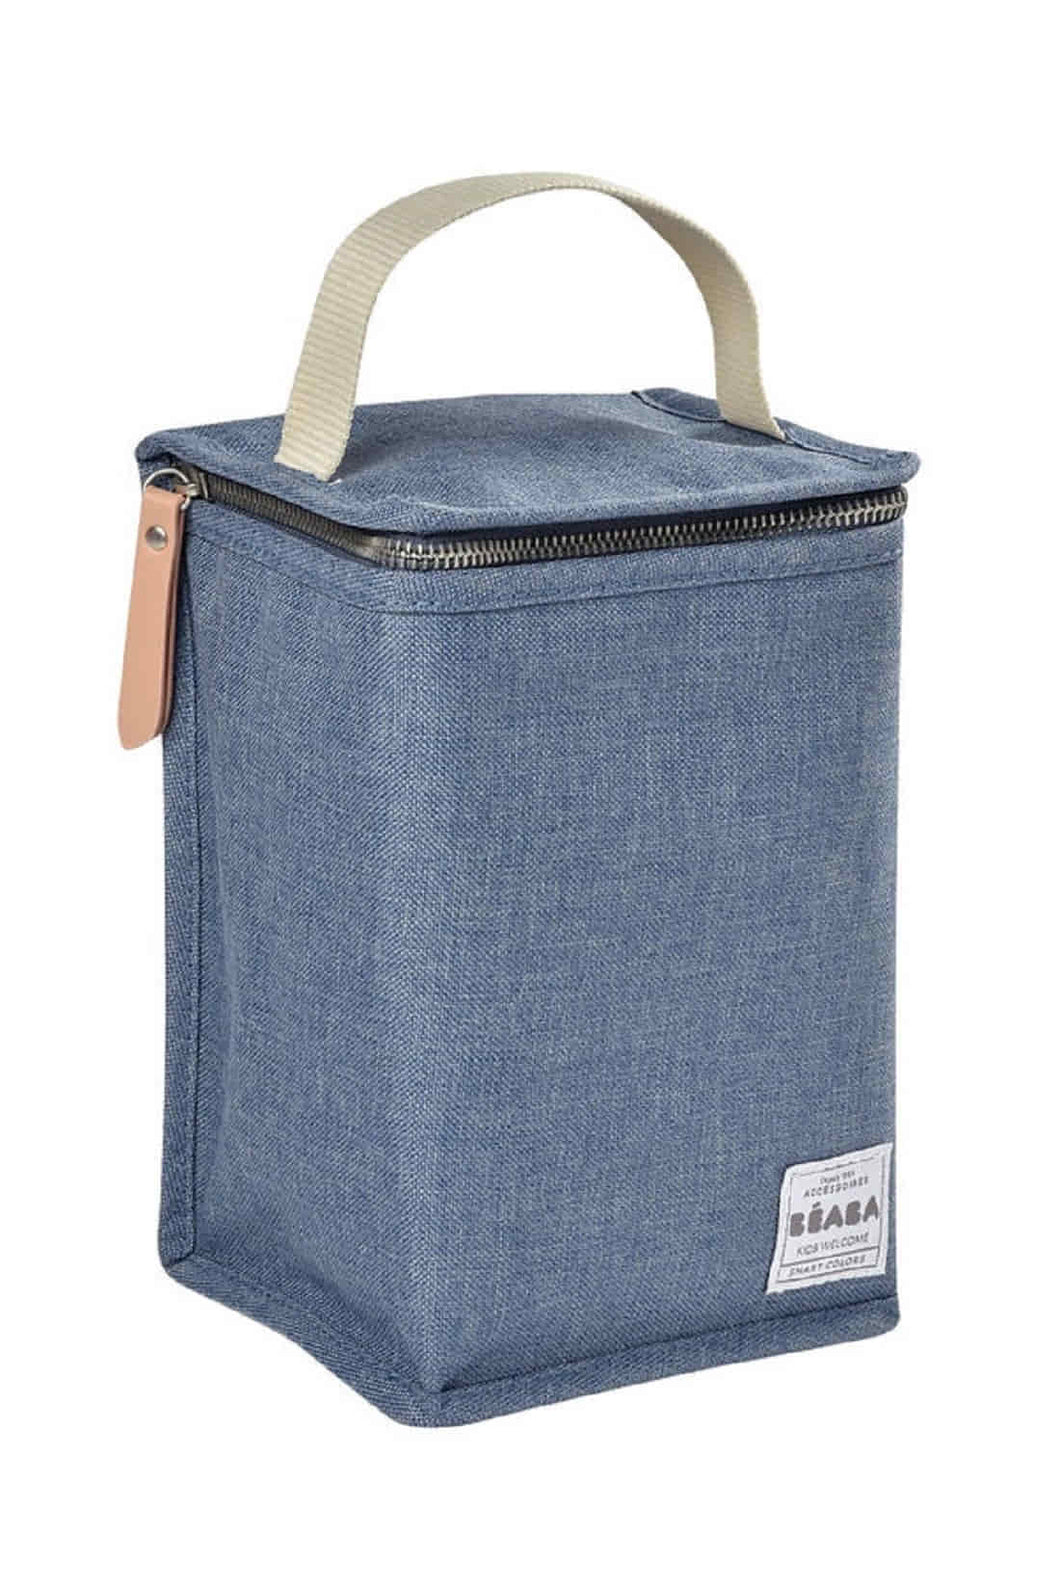 Beaba Insulated Lunch Pouch Blue 2